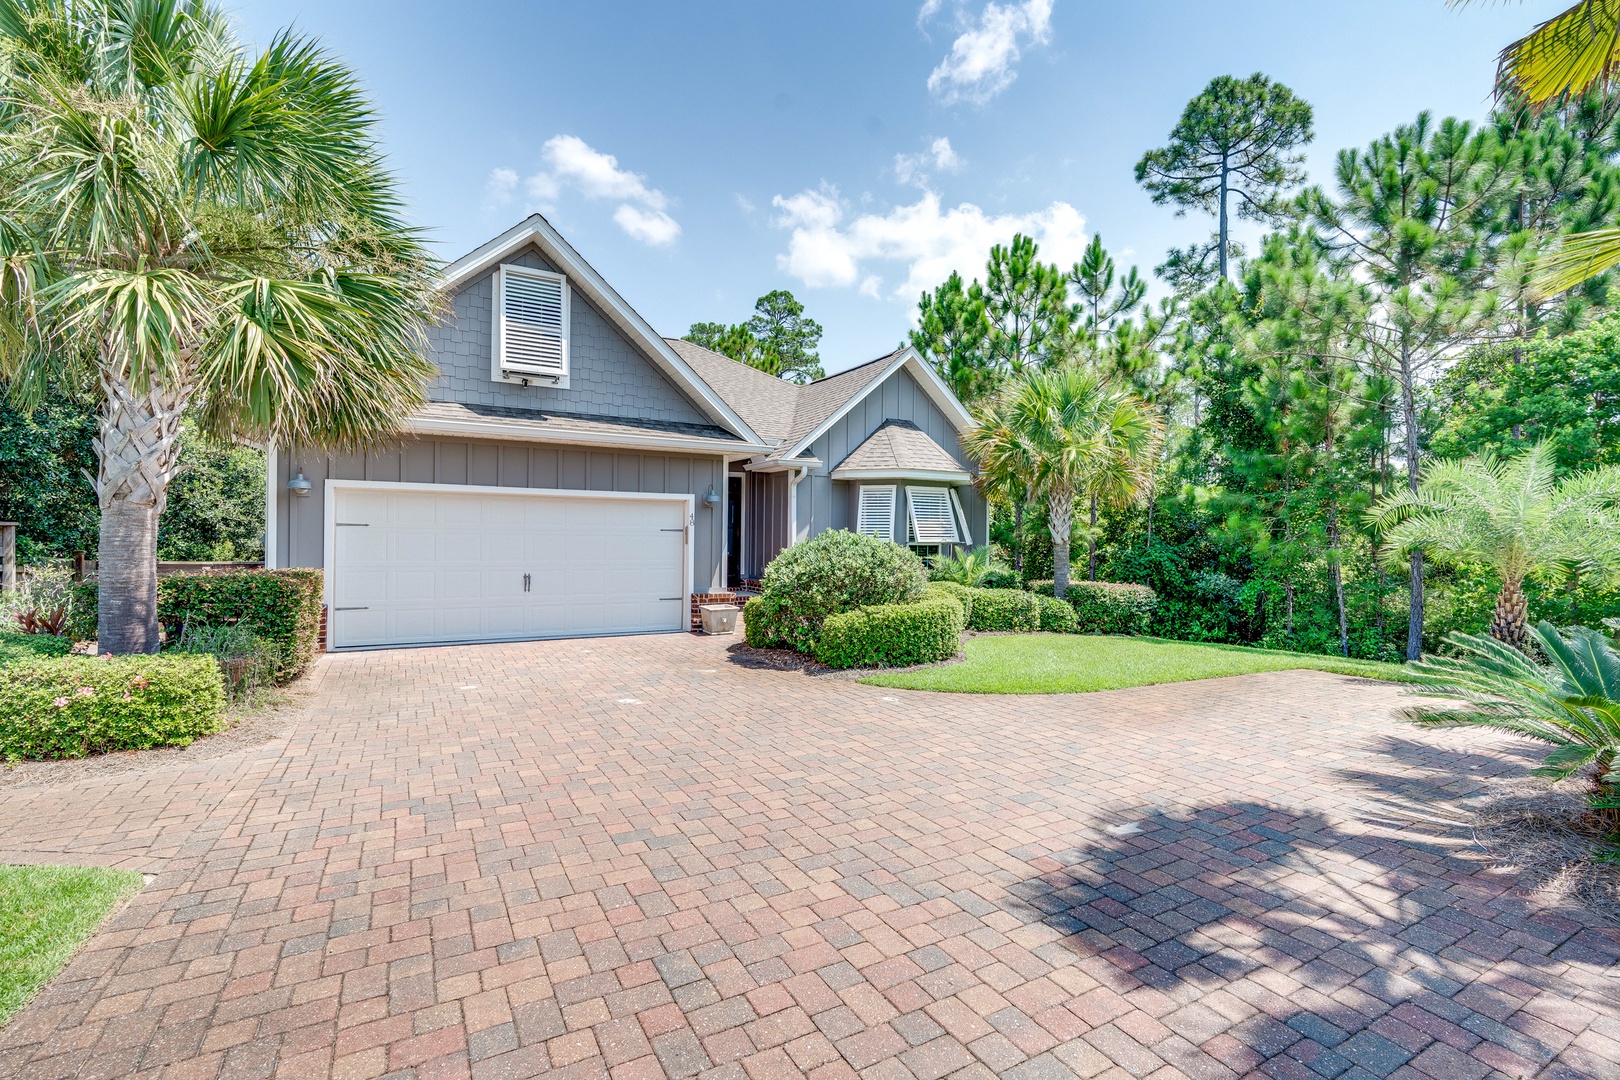 Welcome Home to Sweet Breeze in the Cypress Breeze Neighborhood of 30A!